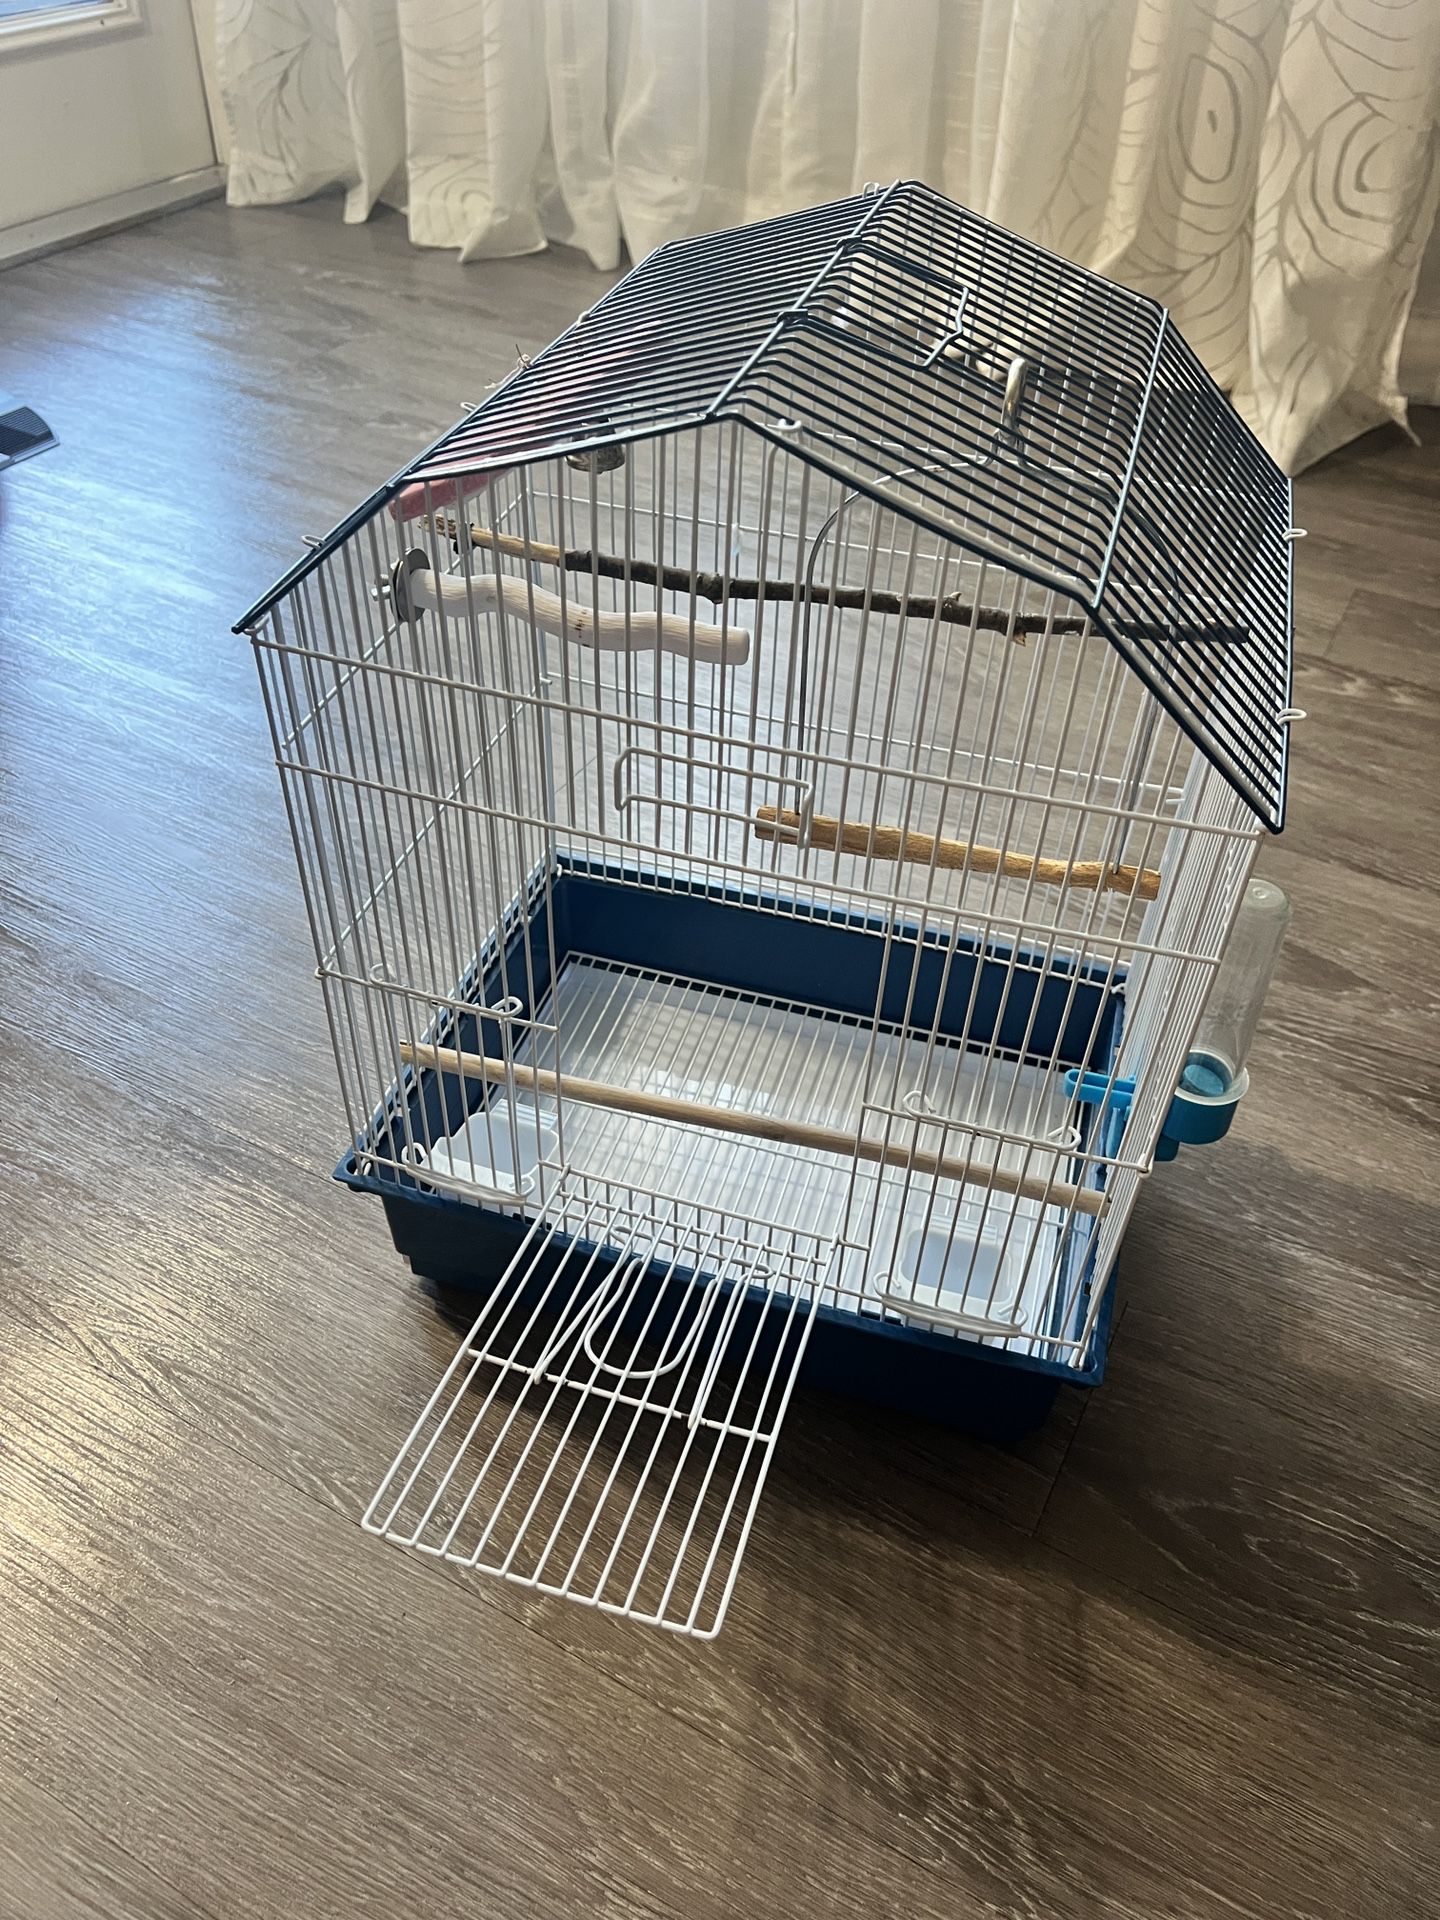 Great Bird Cage. $15